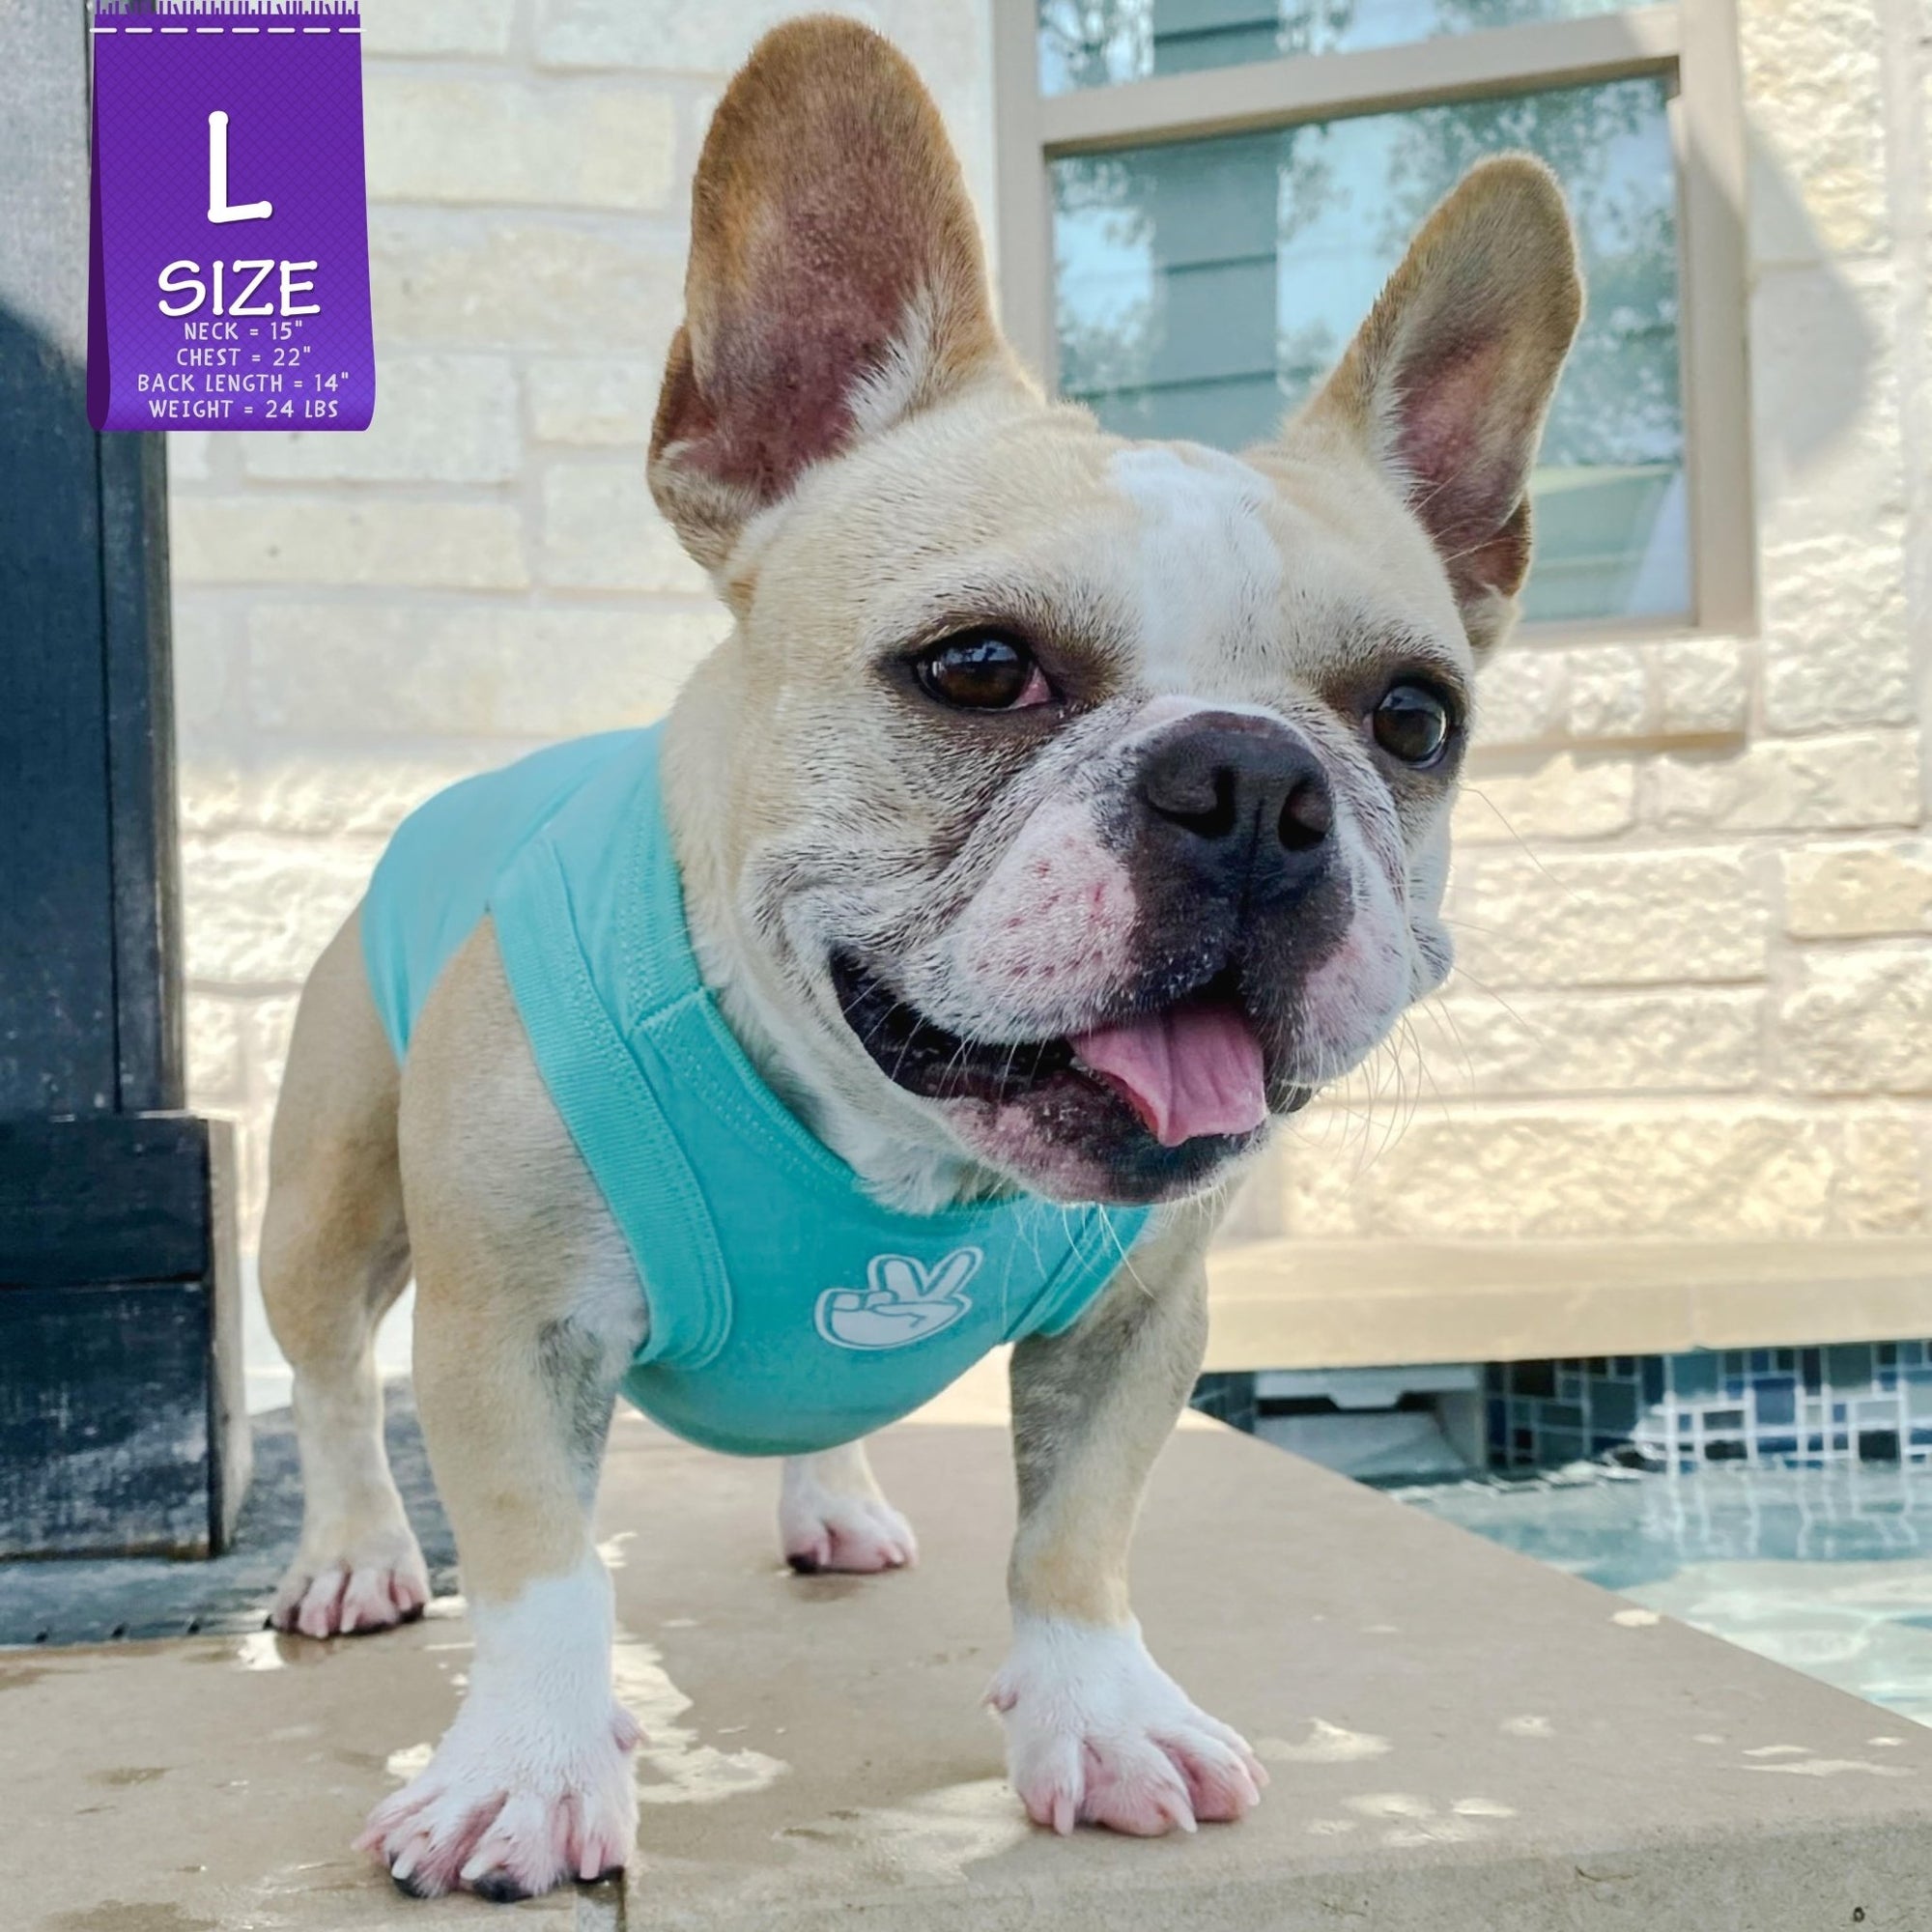 Dog T-Shirt - Frenchie Bulldog wearing &quot;Good Life&quot; dog t-shirt in teal - with white finger peace sign emoji on chest - standing outdoors by a pool - Wag Trendz